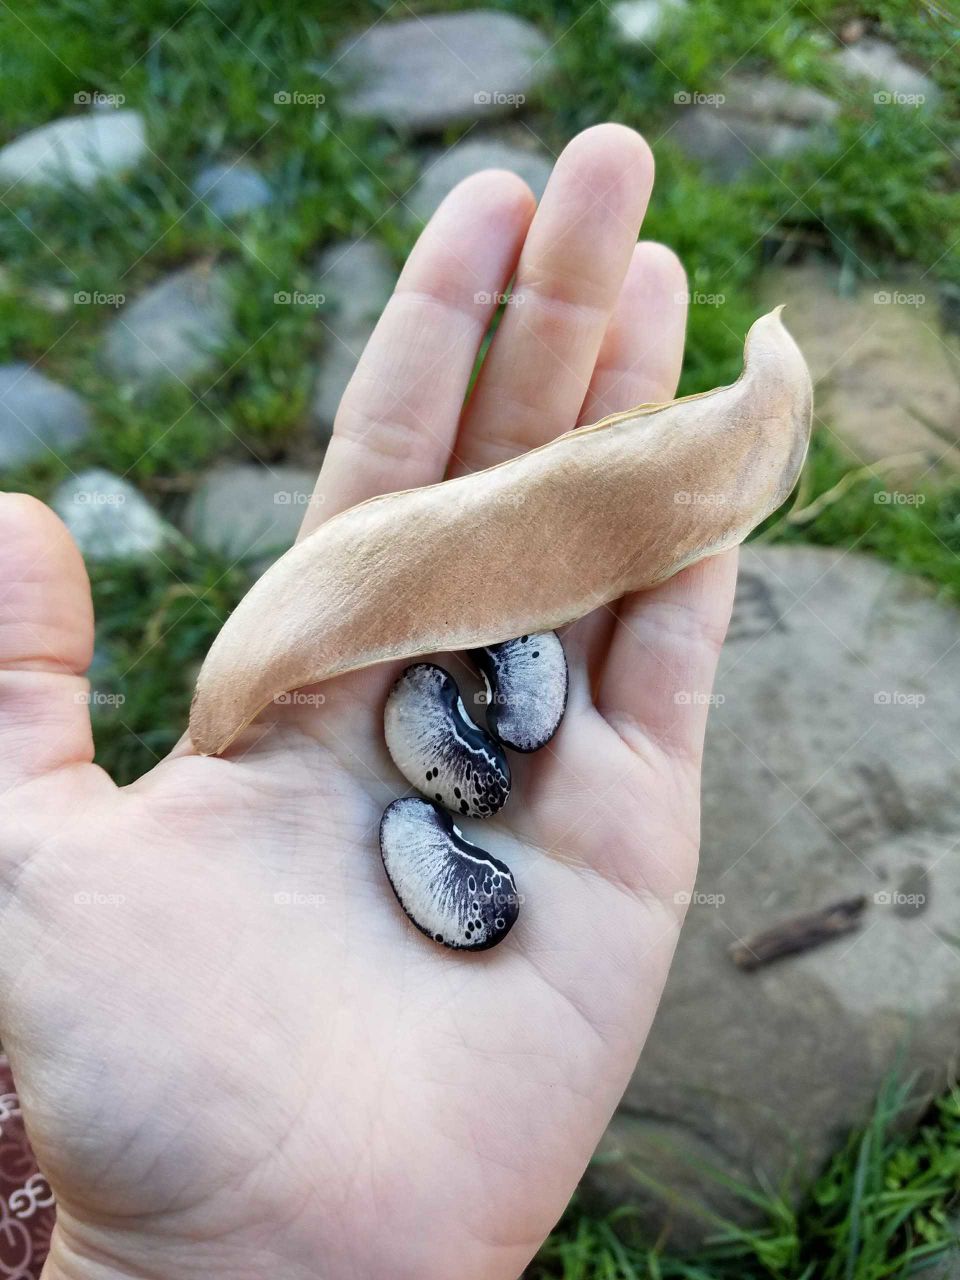 Three beans out of the pod. Lima season.